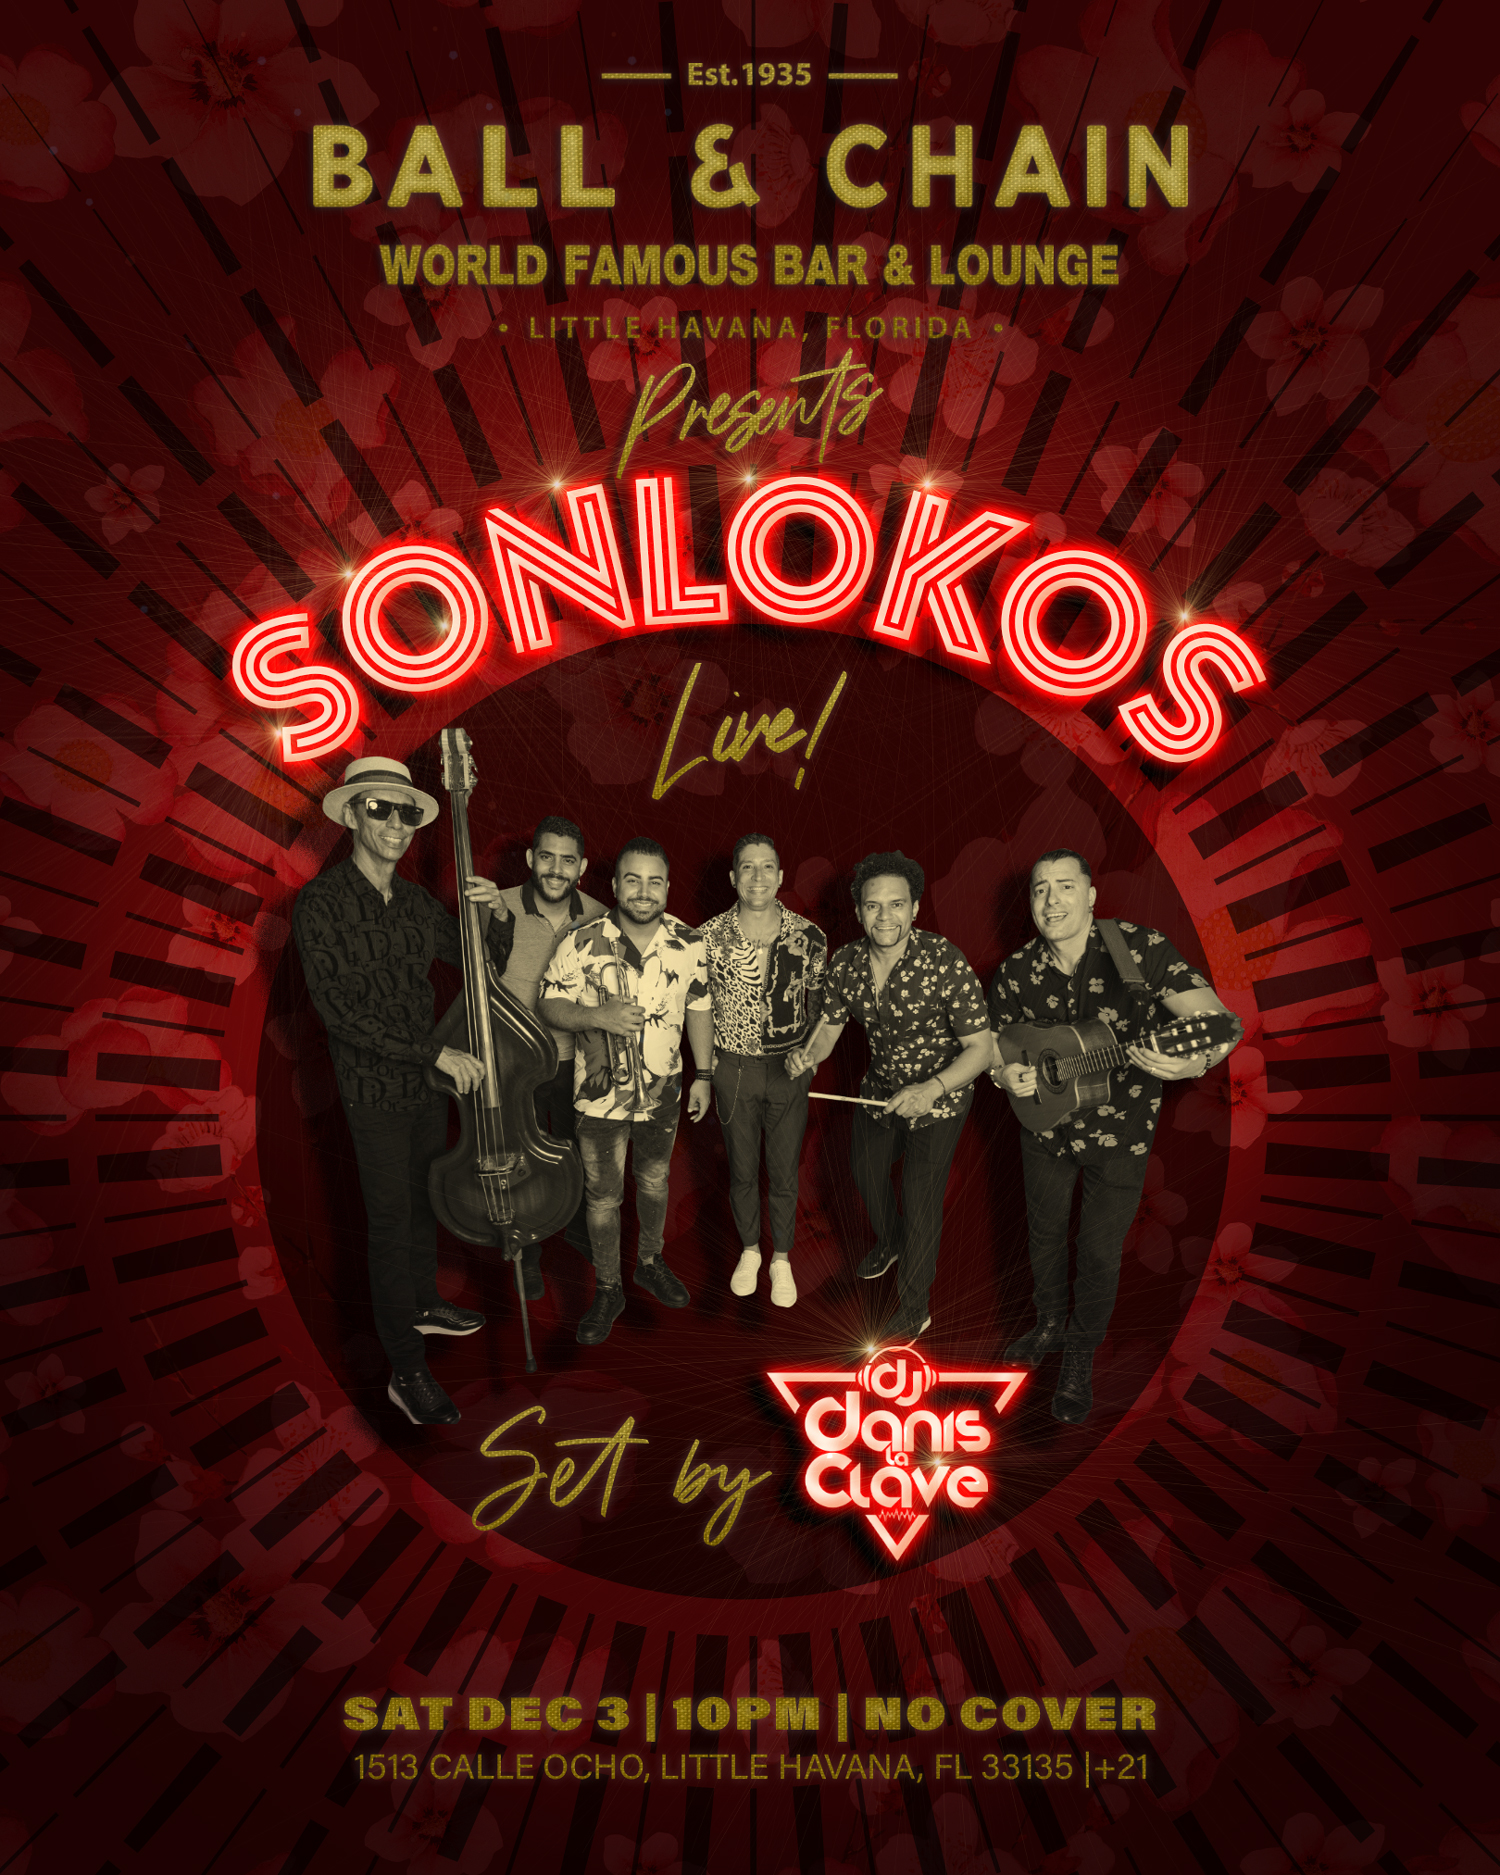 The band Sonlokos on a red event flyer